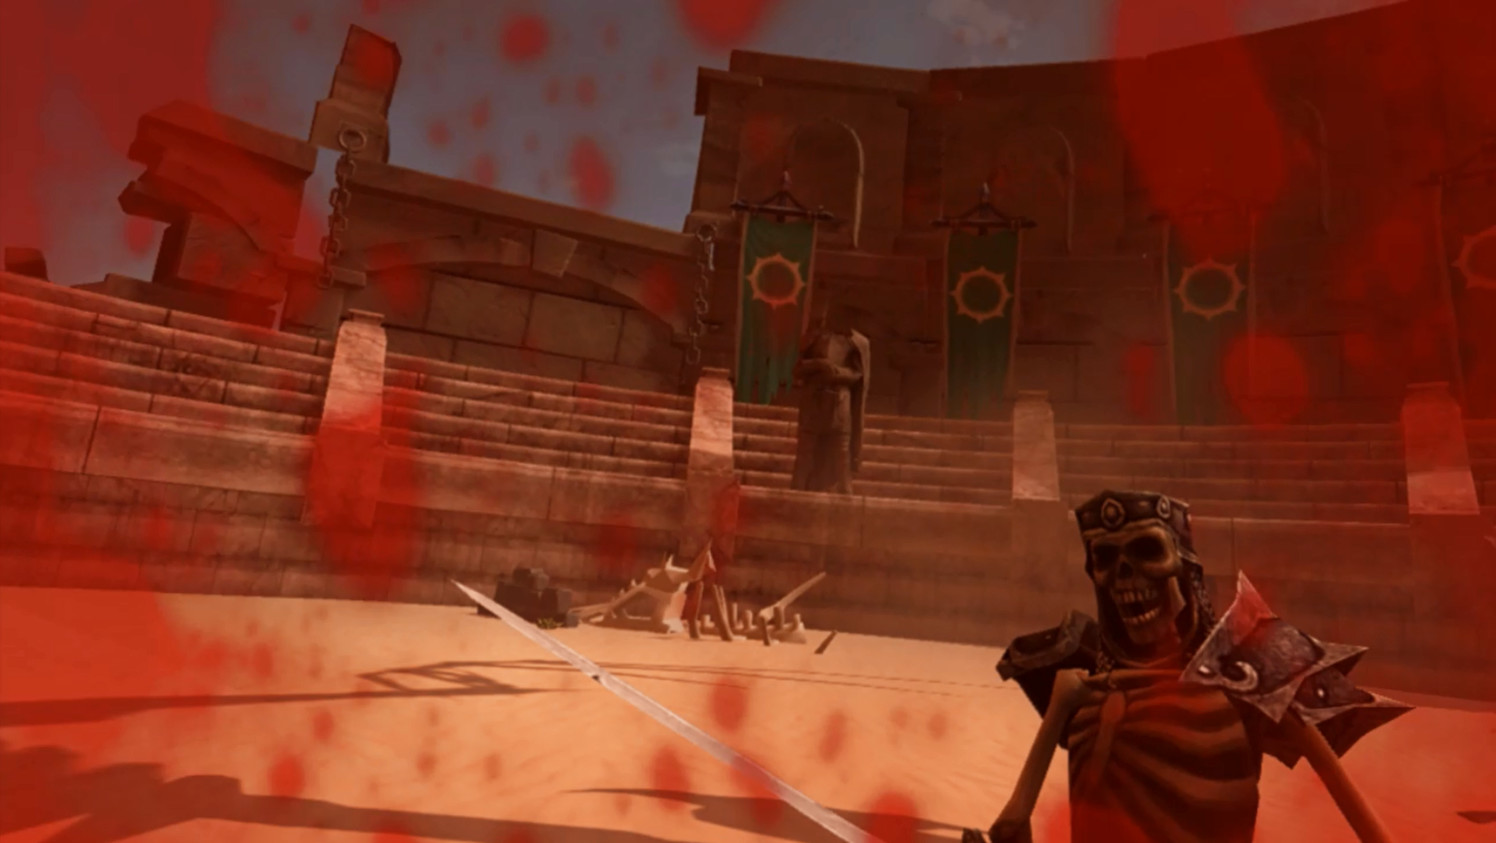 [$ 5.12] Arena: Blood on the Sand VR Steam CD Key